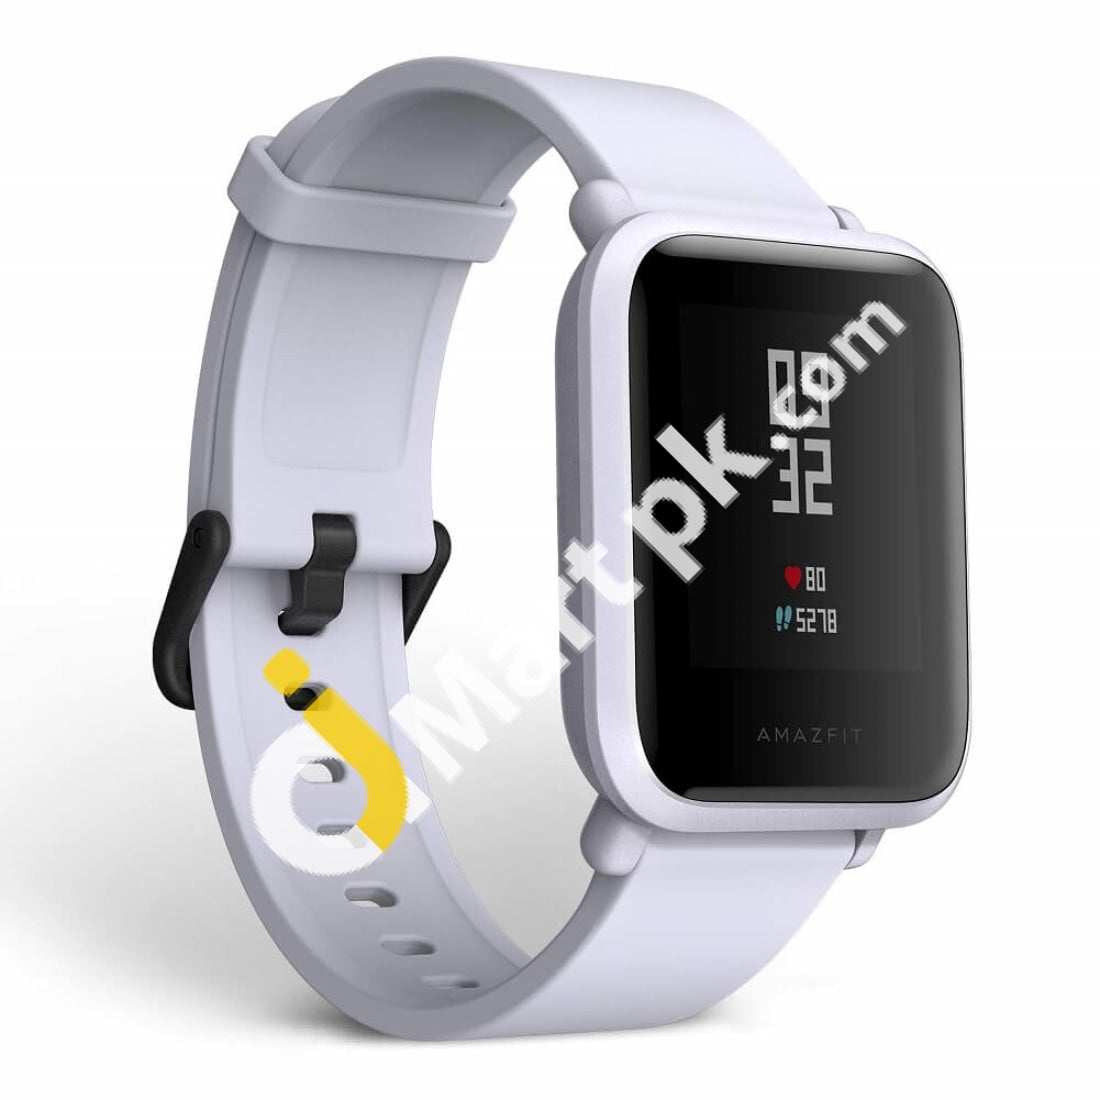 Amazfit Bip Smartwatch By Huami With All-Day Heart Rate & Activity Tracking Sleep Monitoring Gps